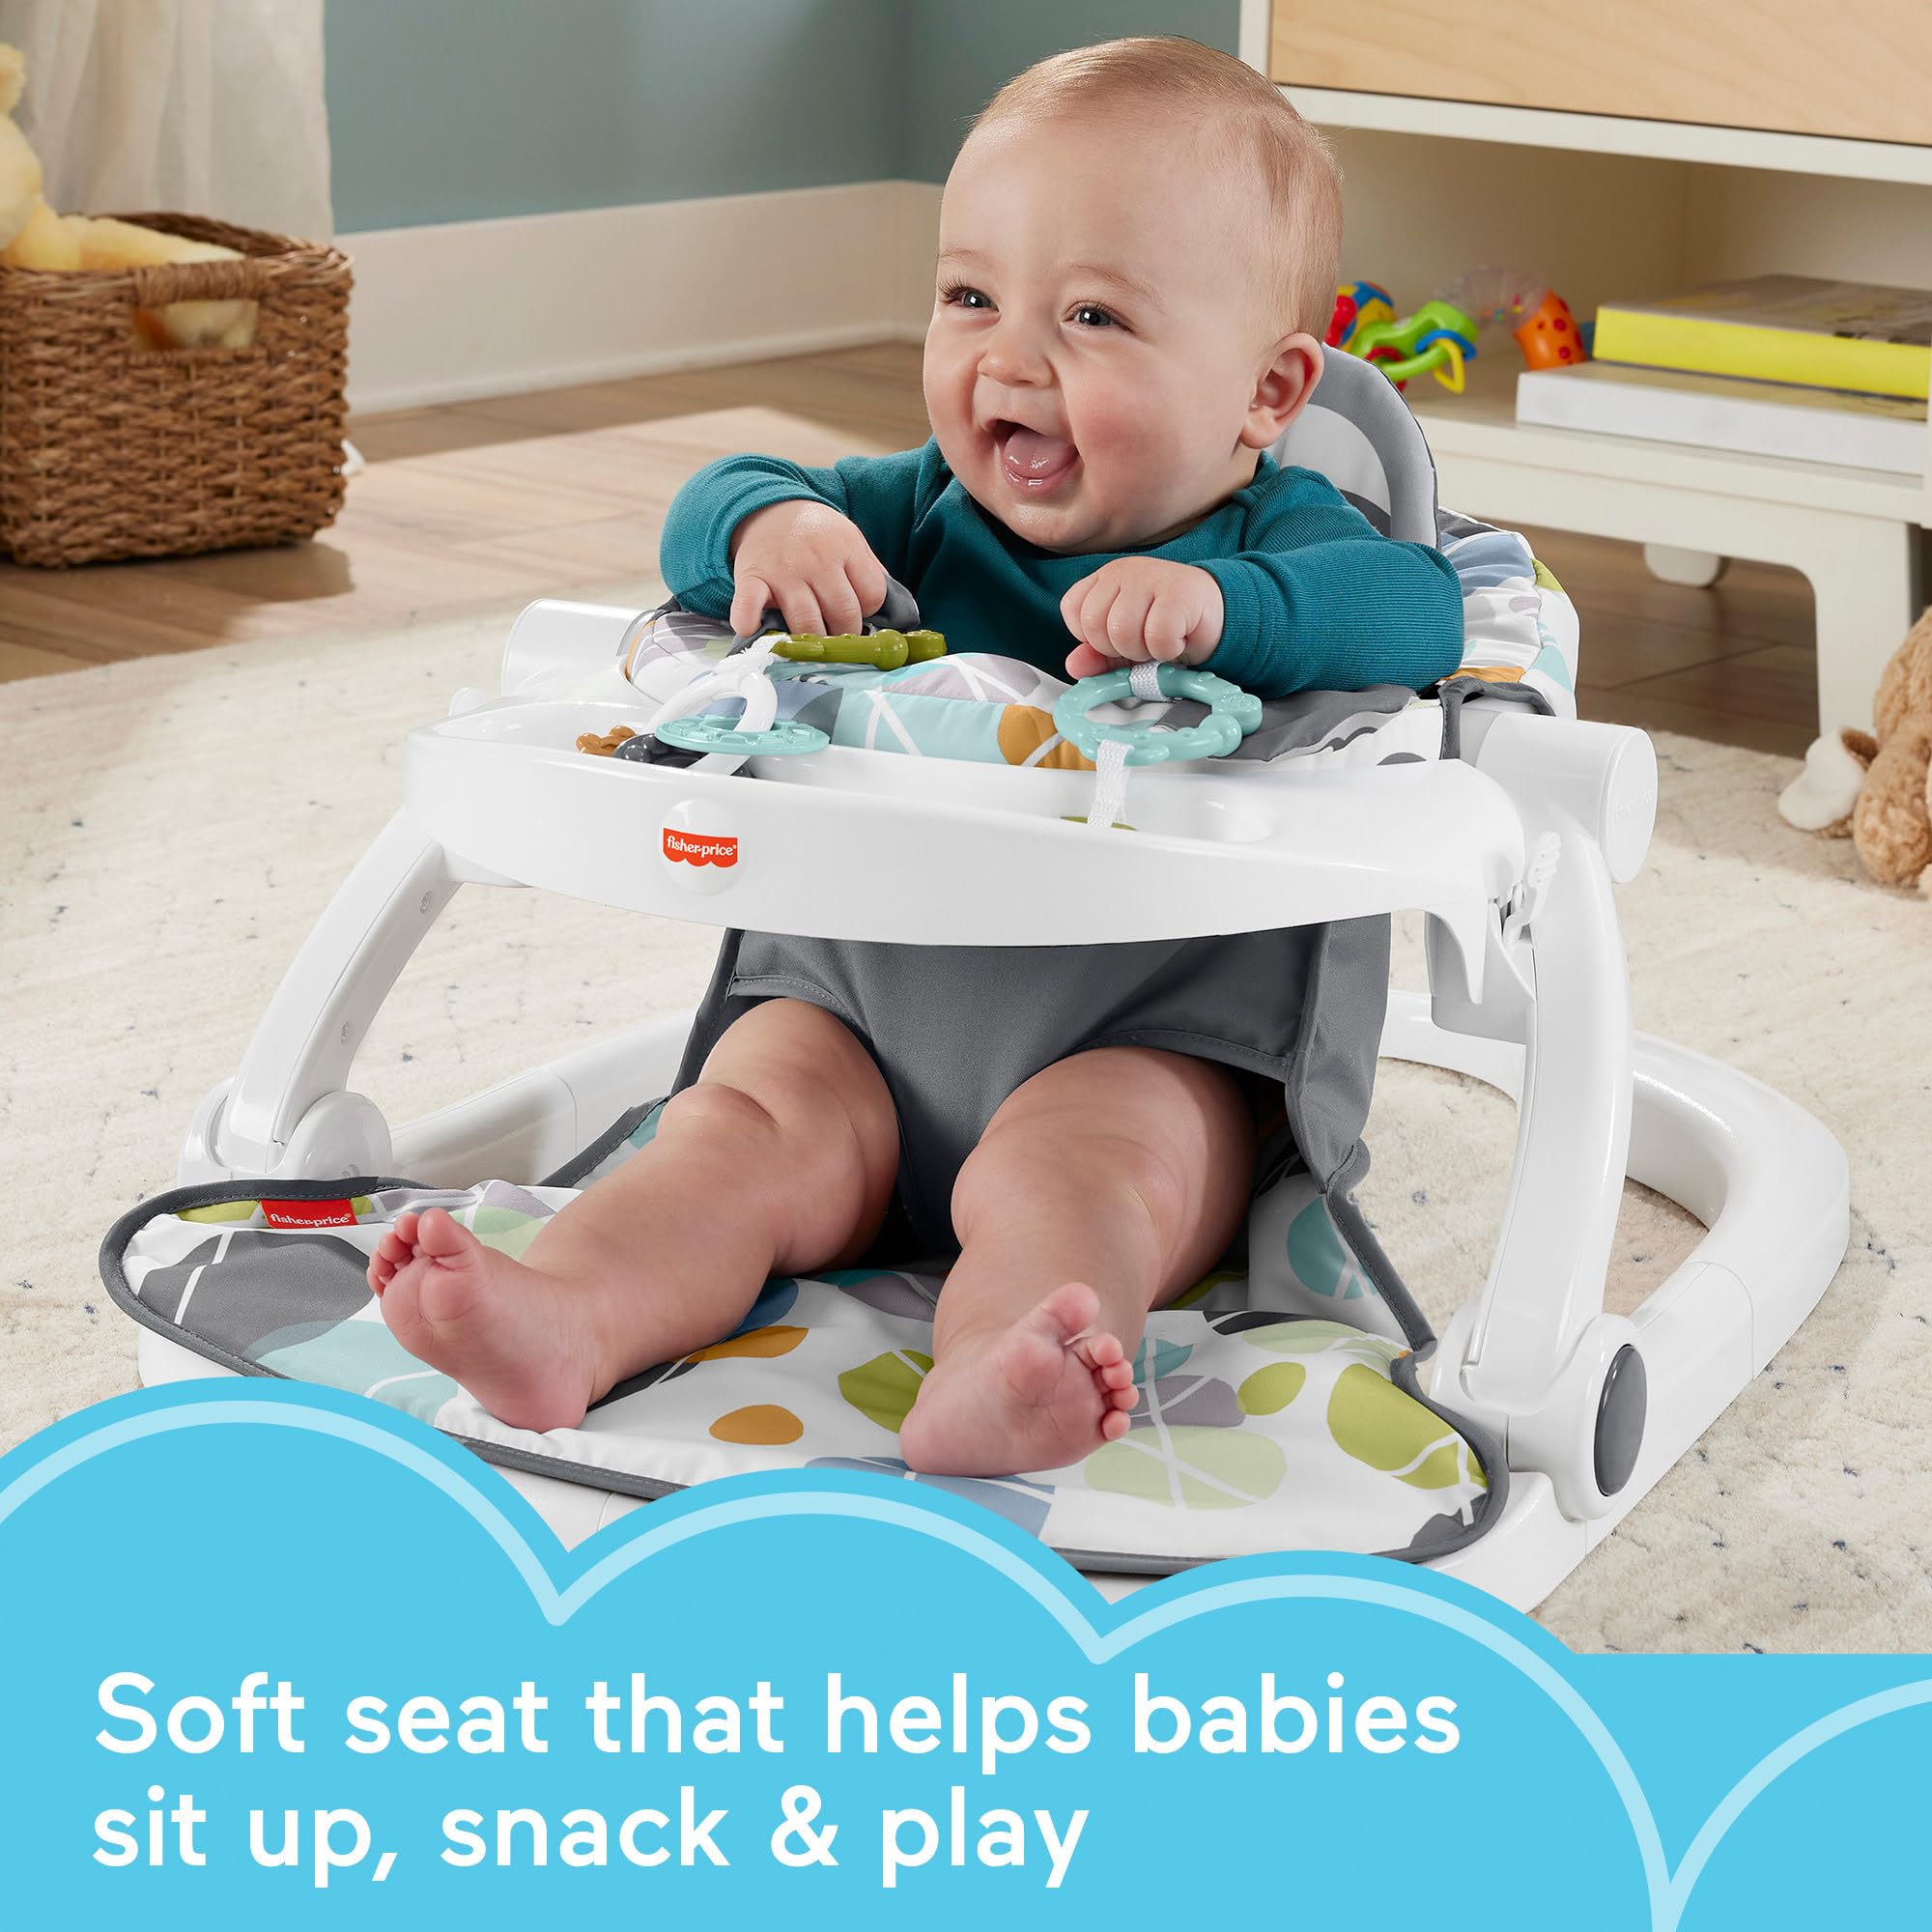 Fisher-Price Baby Portable Chair with Snack Tray, Sit Me Up Floor Seat with Linkable Clacker & Teether Toys, Cute Sloth